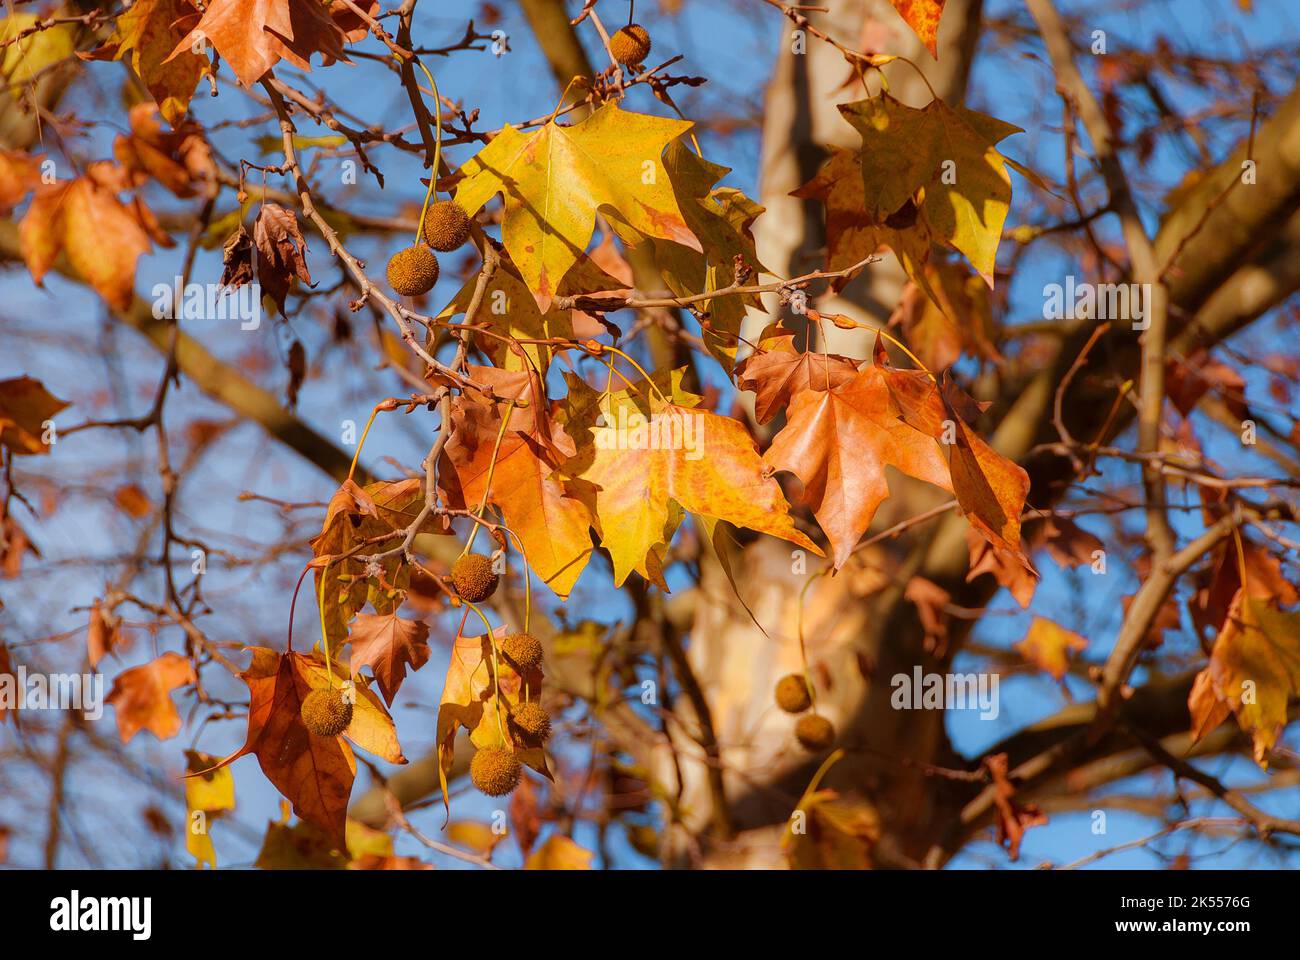 Autumnal and foliage background. Autumn arrives, sycamore leaves turn from green to yellow,  brown and orange Stock Photo